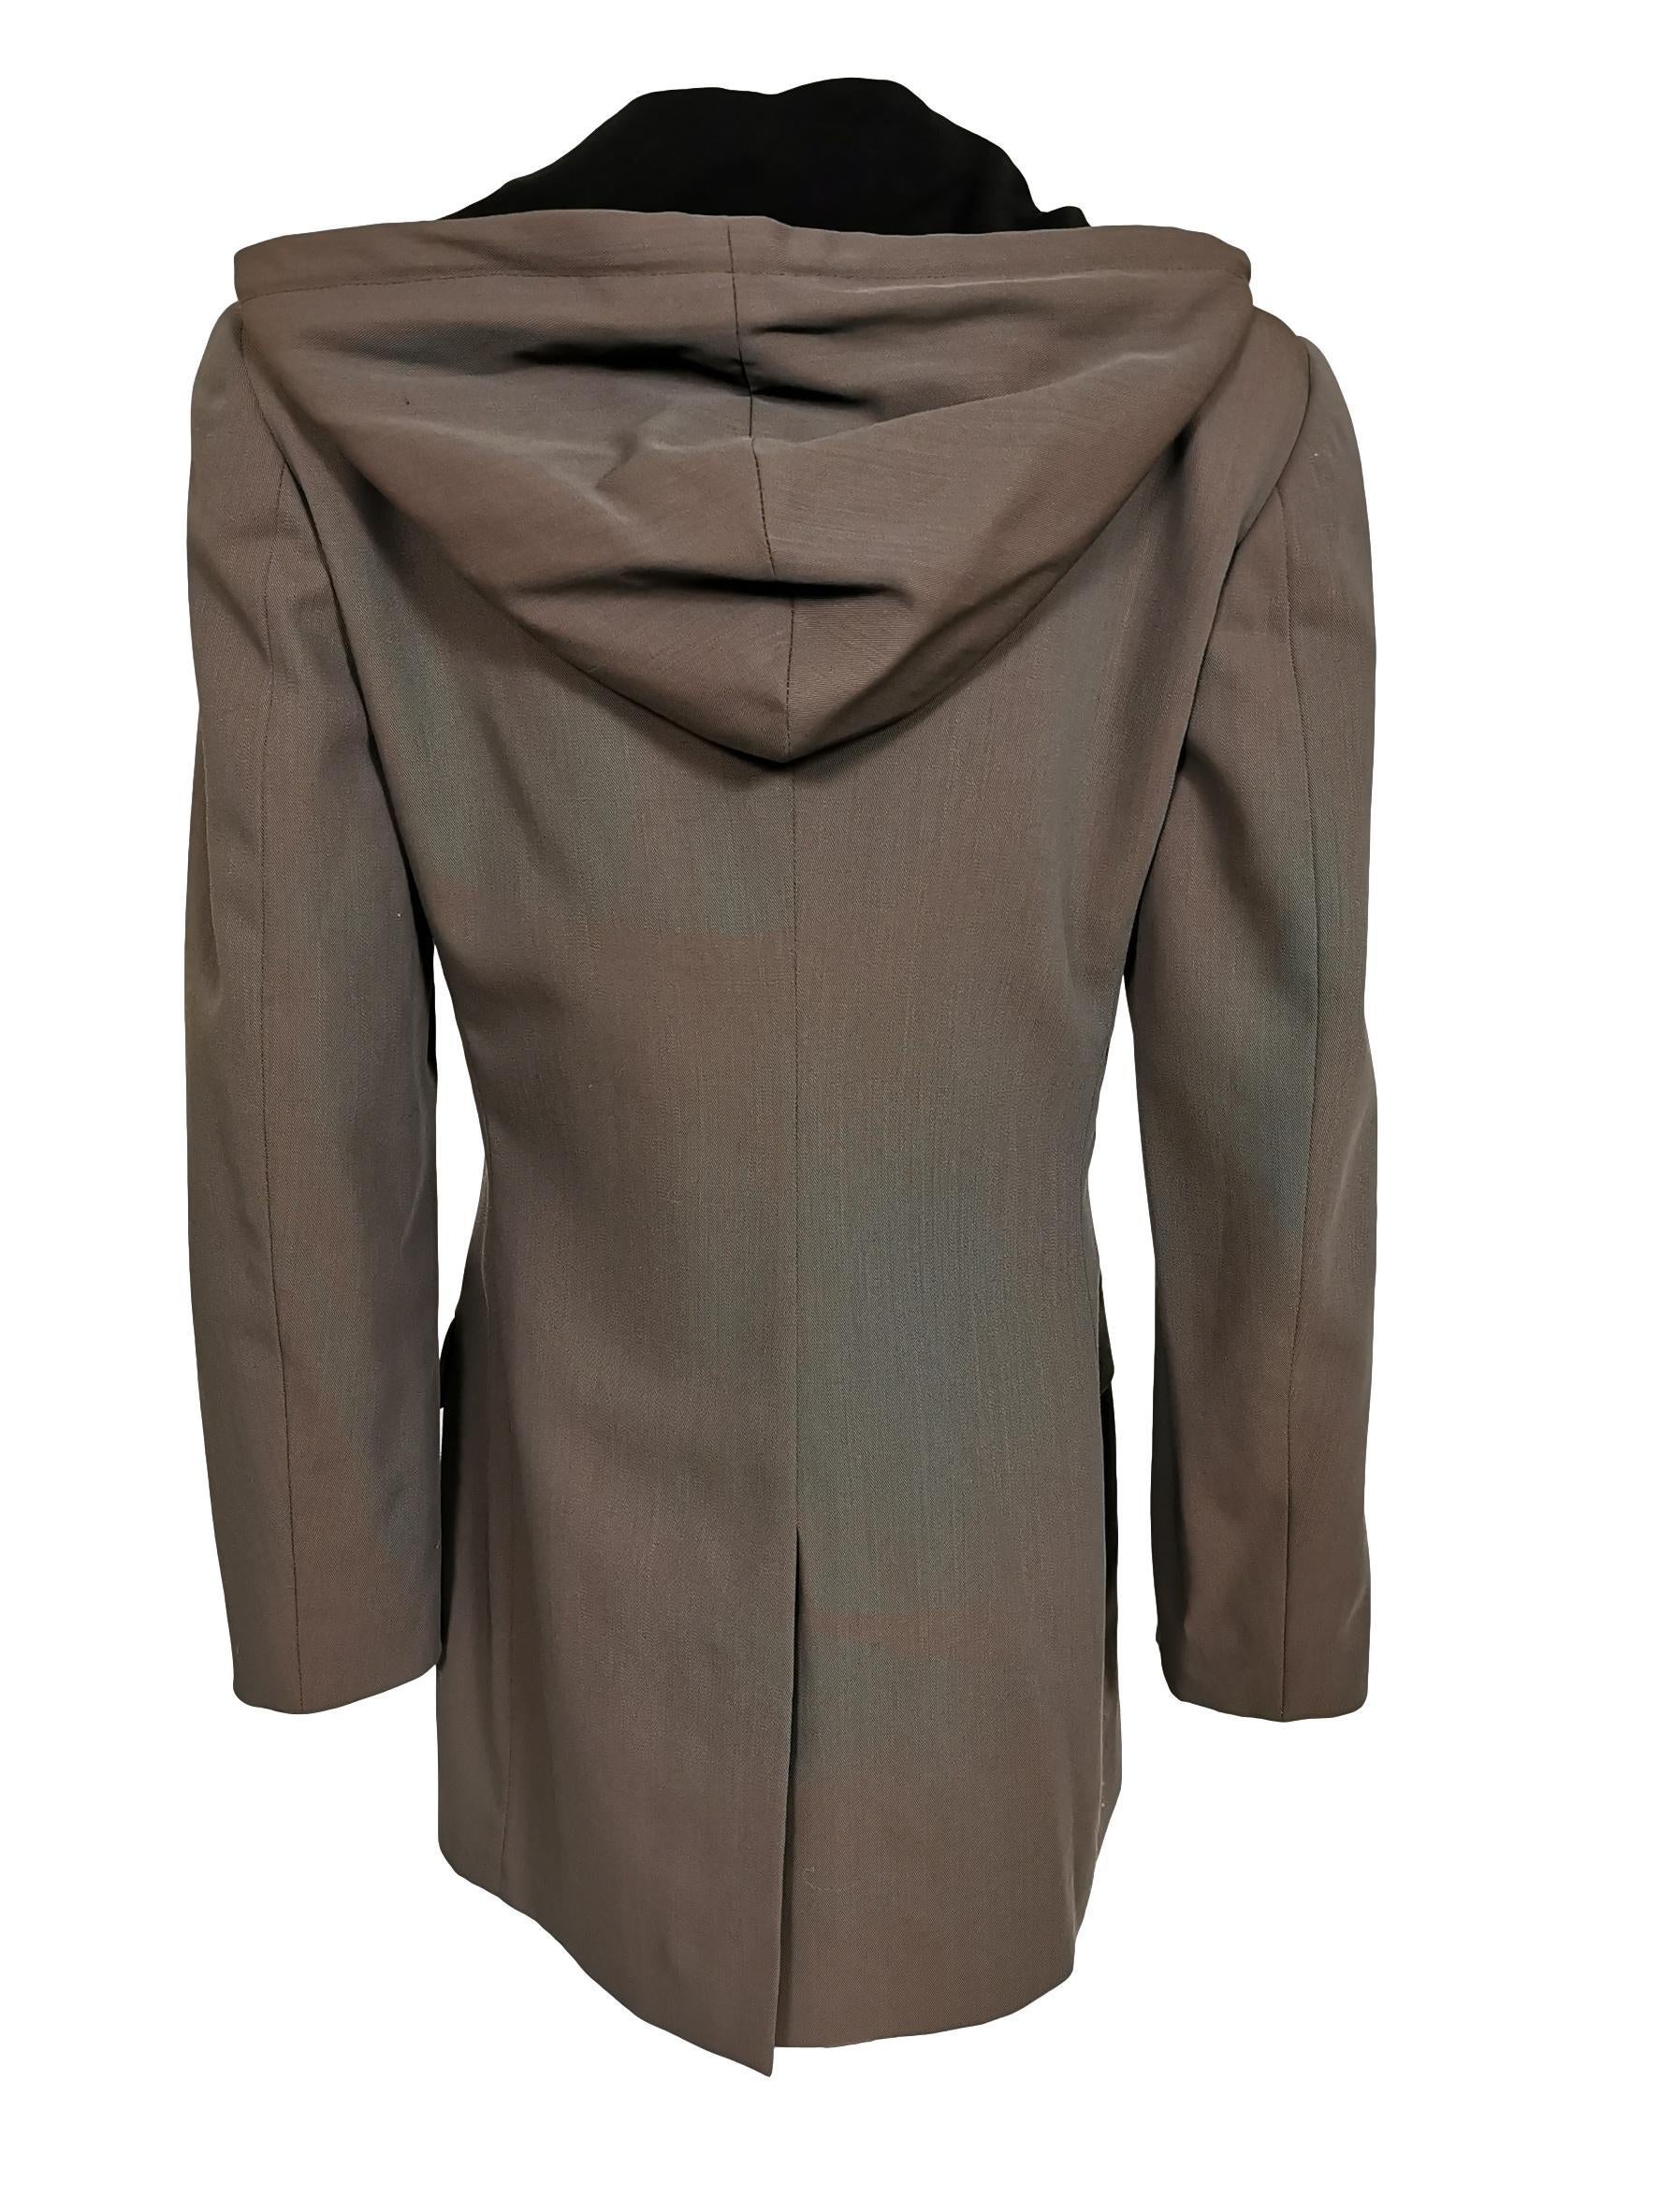 Jean Paul Gaultier Hooded Dress Jacket Autumn/Winter 1998 In Good Condition For Sale In Bath, GB